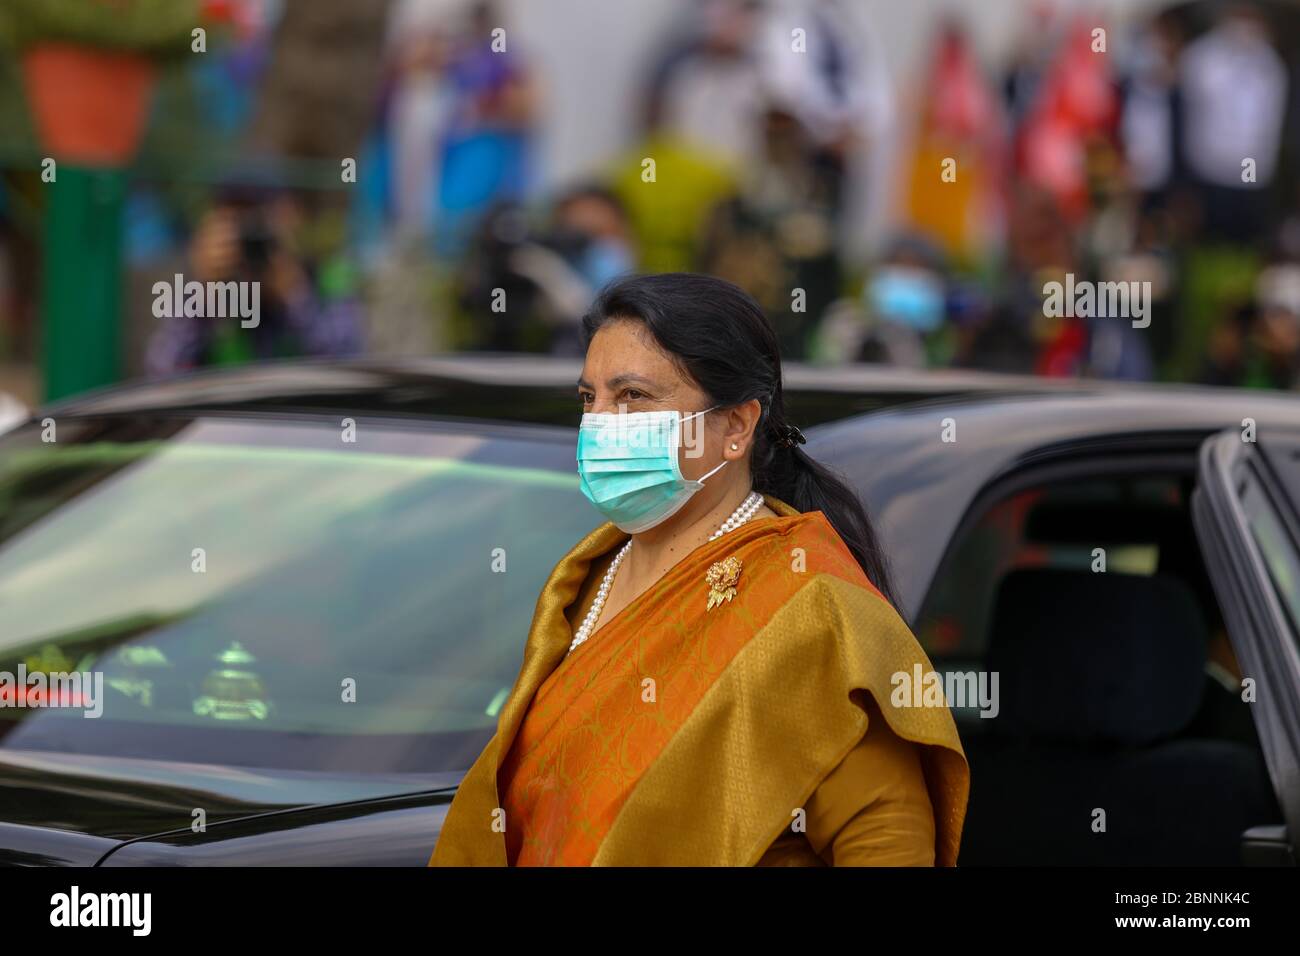 Nepal's President, Bidhya Devi Bhandari wearing a face mask on her arrival at the parliament to present government's policies and programs for the upcoming fiscal year during the Coronavirus (COVID-19) lockdown crisis. Stock Photo